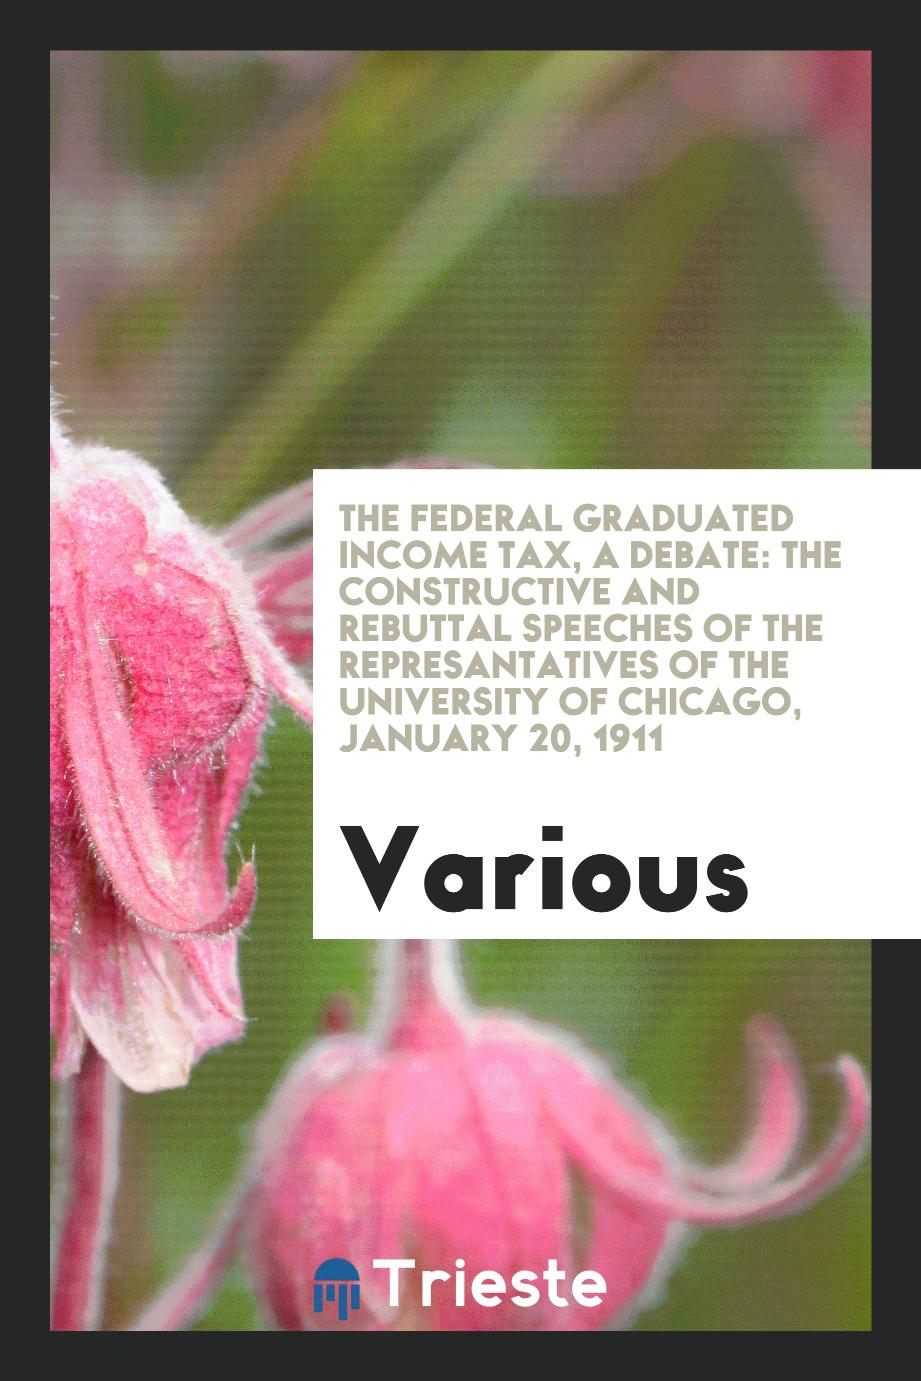 The Federal Graduated Income Tax, a Debate: The Constructive and Rebuttal Speeches of the represantatives of the University of Chicago, january 20, 1911